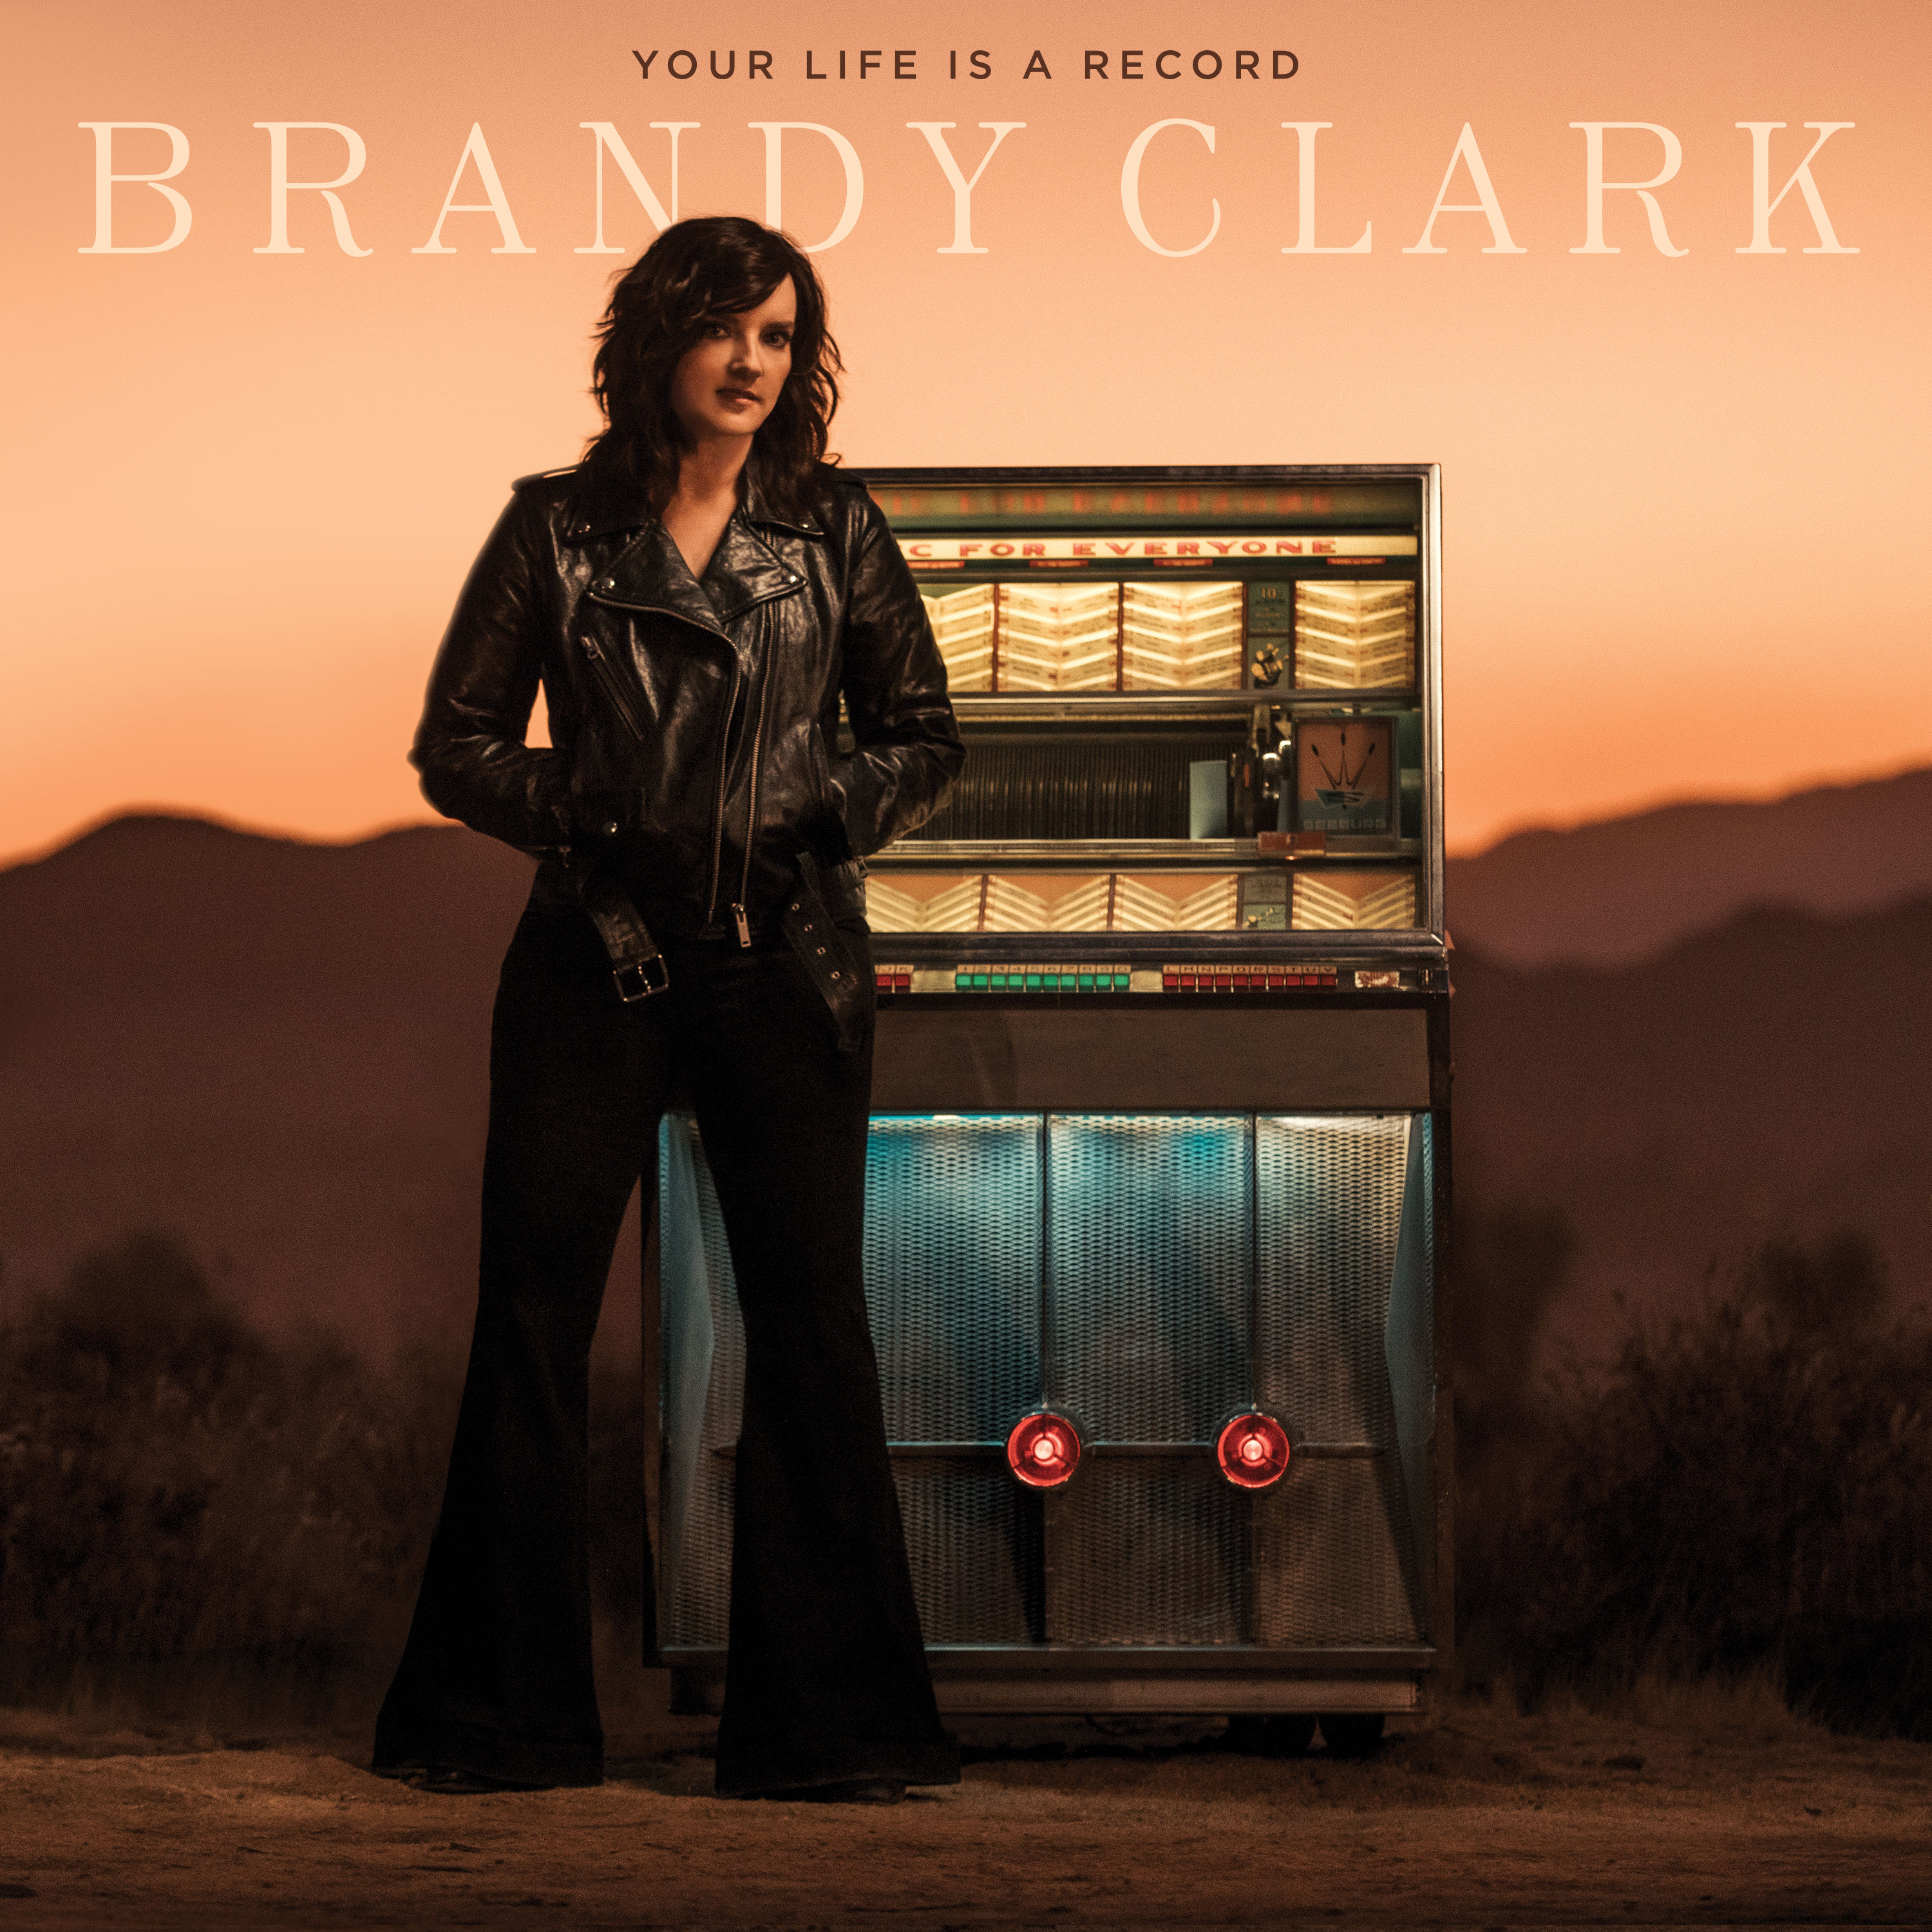 Brandy Clark – Your Life is a Record (2020) [FLAC 24bit/48kHz]